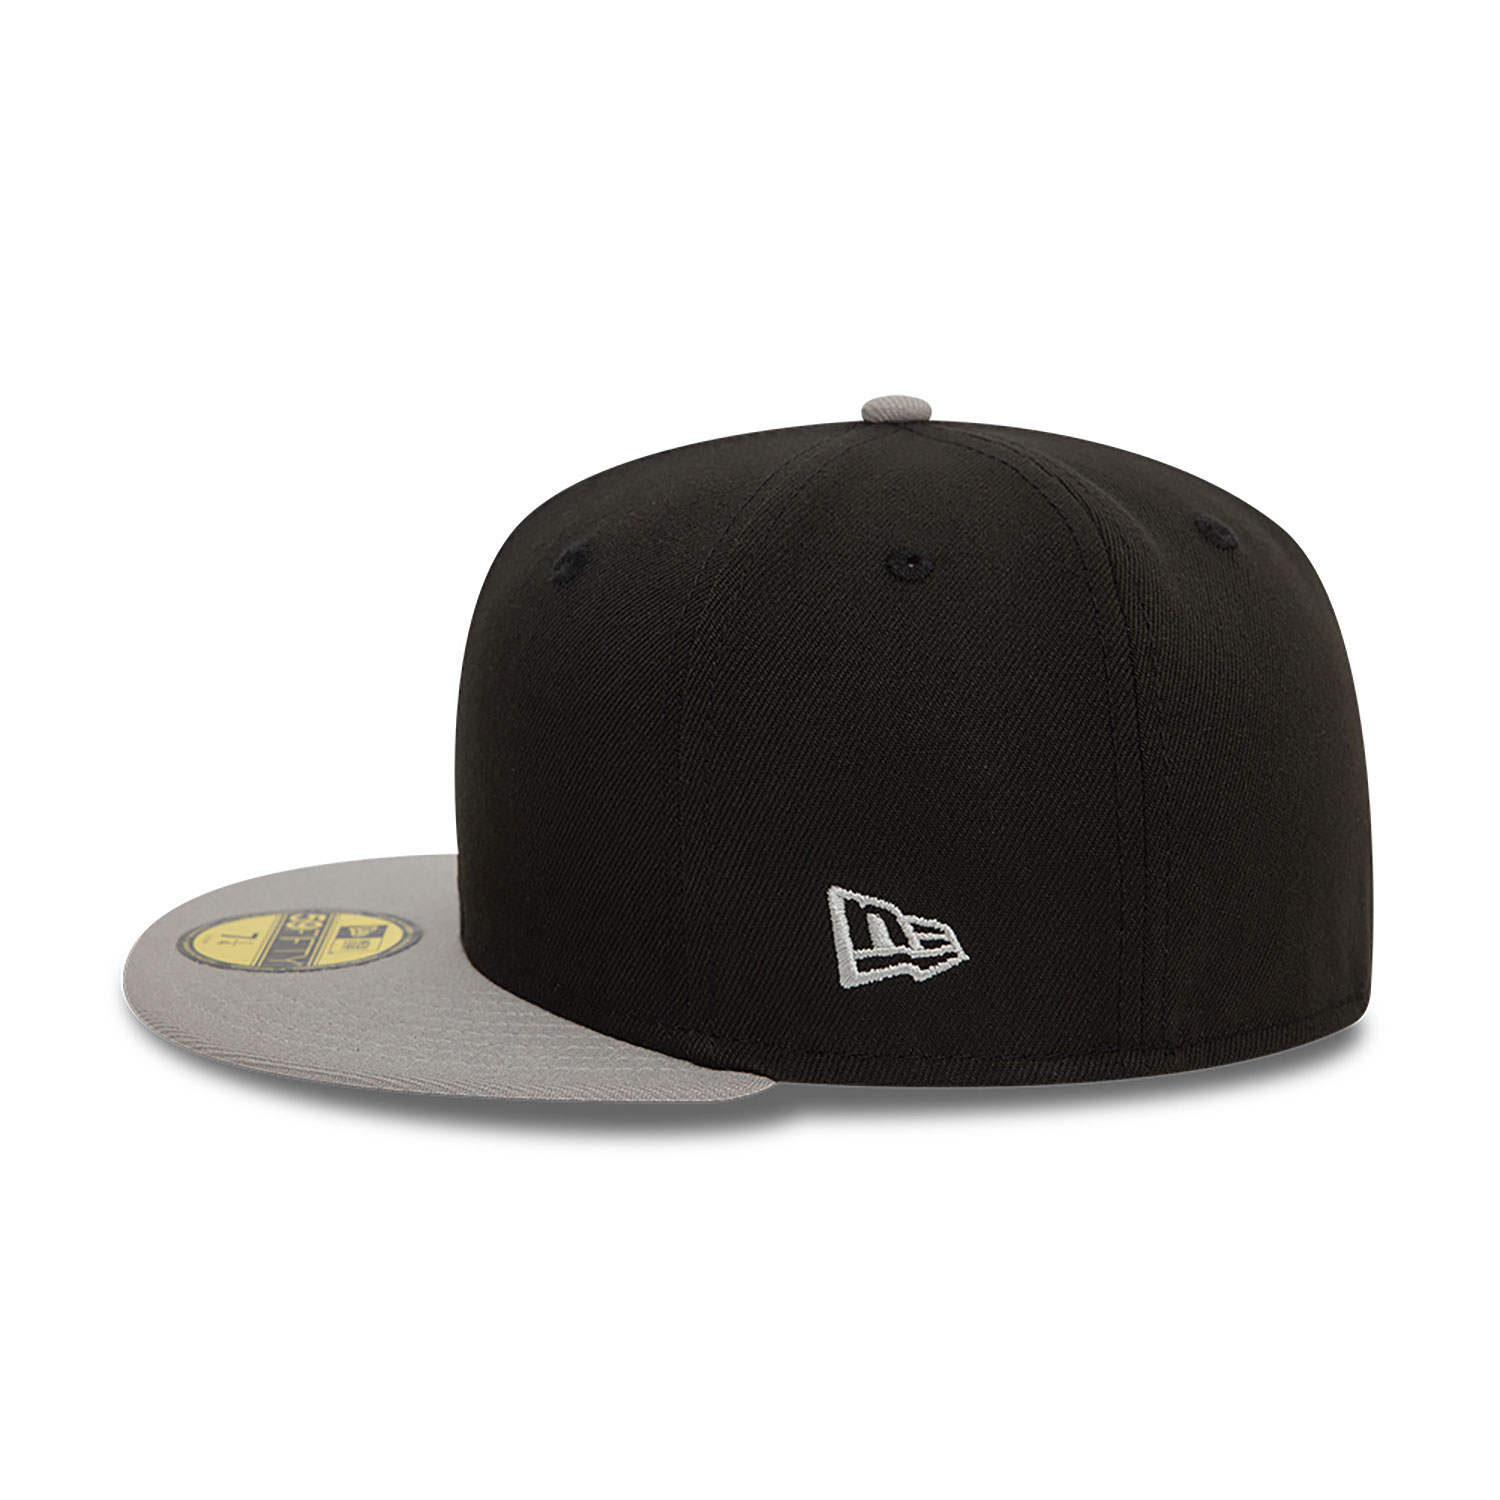 New Era Contrast Crown Black and Grey 59FIFTY Fitted Cap